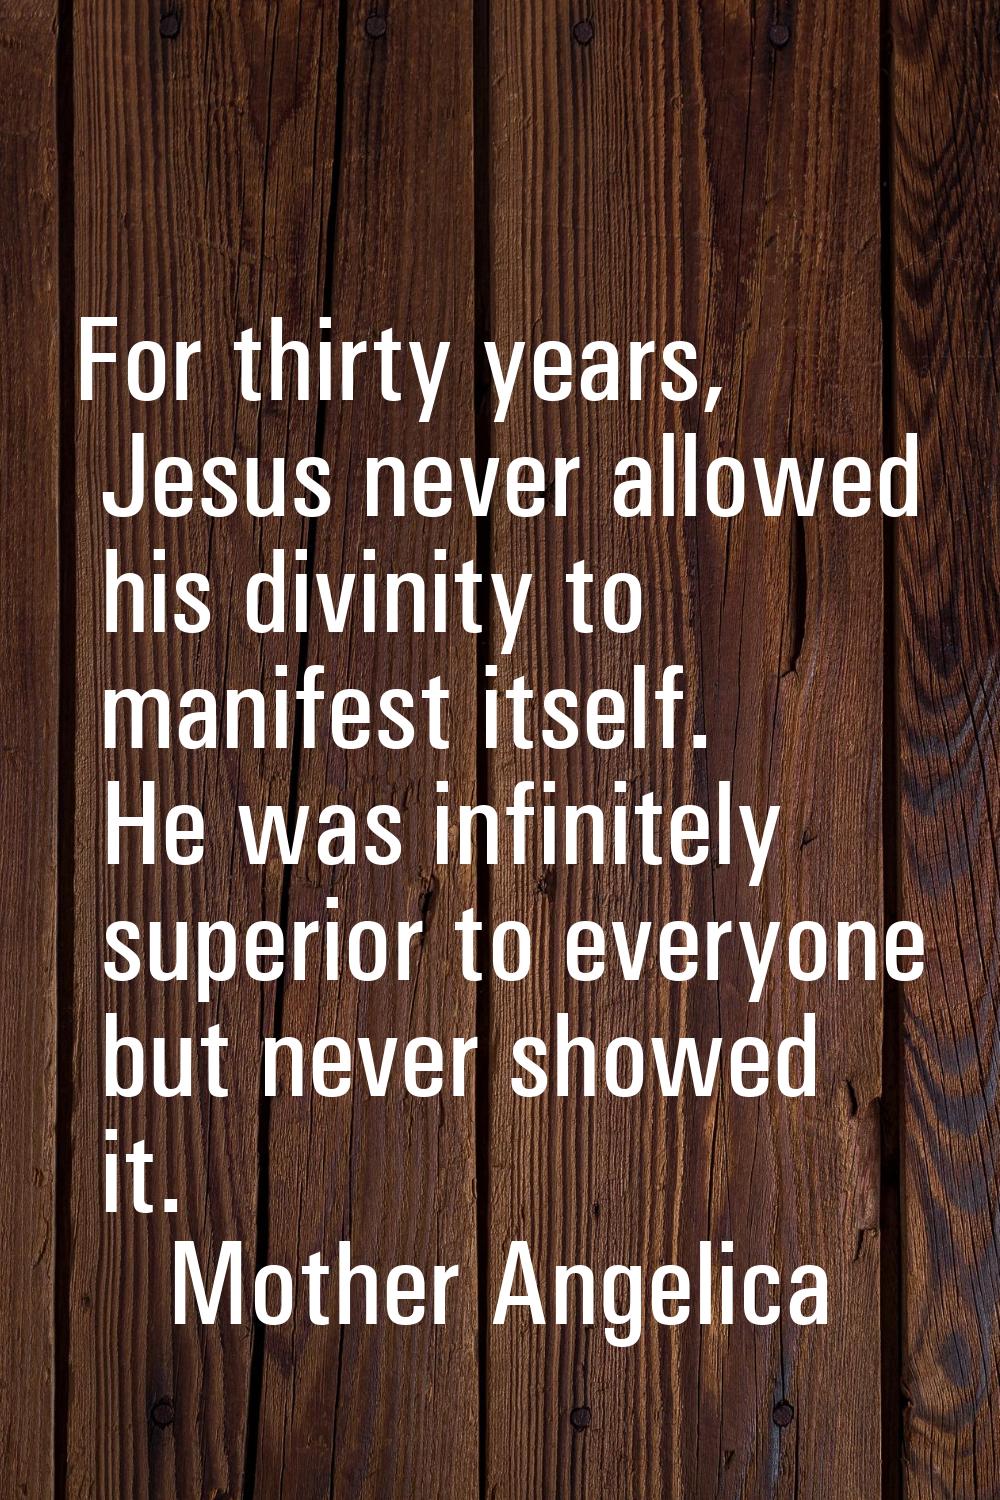 For thirty years, Jesus never allowed his divinity to manifest itself. He was infinitely superior t